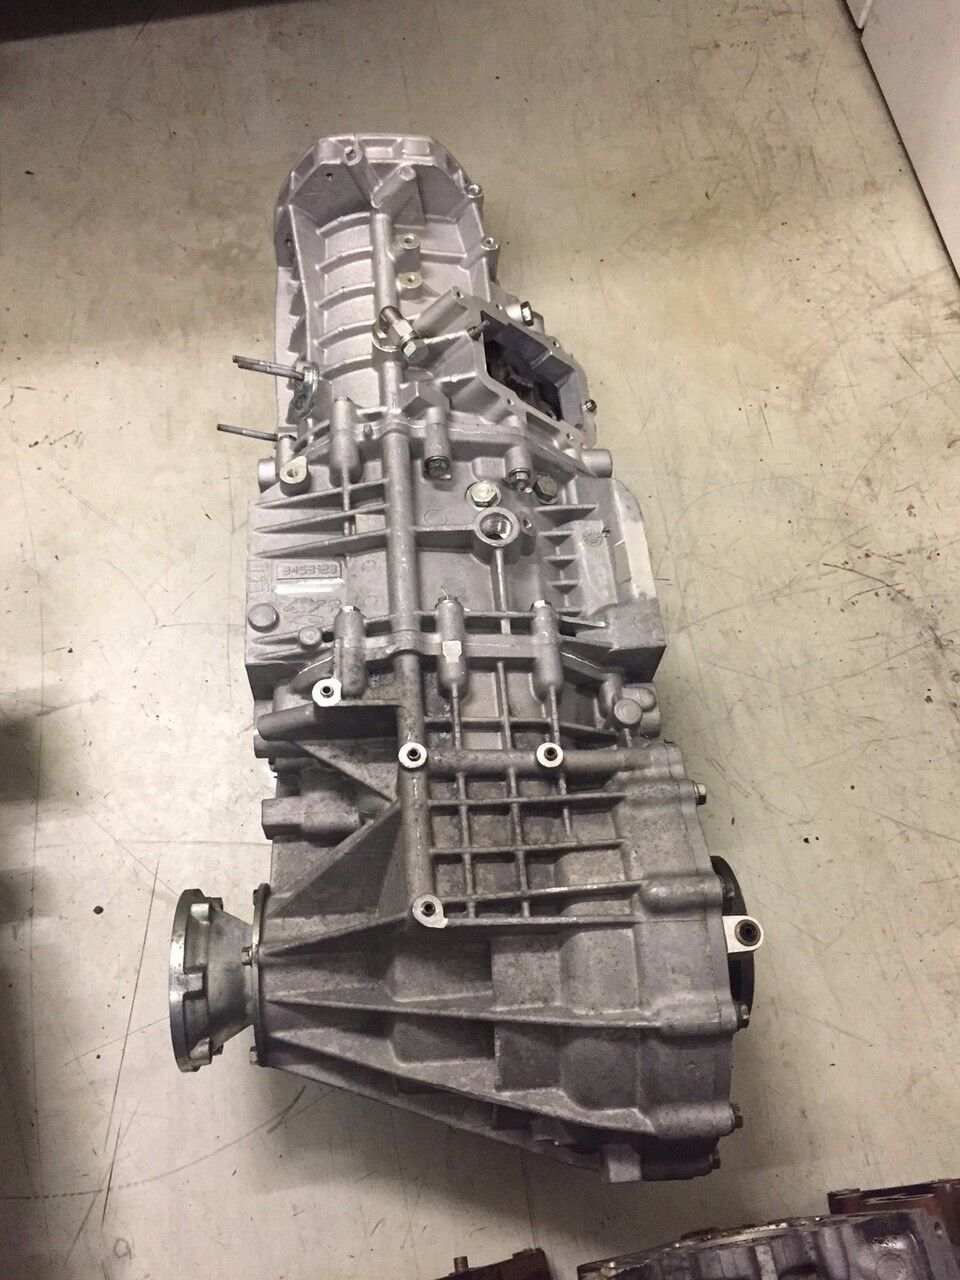 Aston Martin AY93-7002-AA 6 speed transaxle gearbox for One-77 